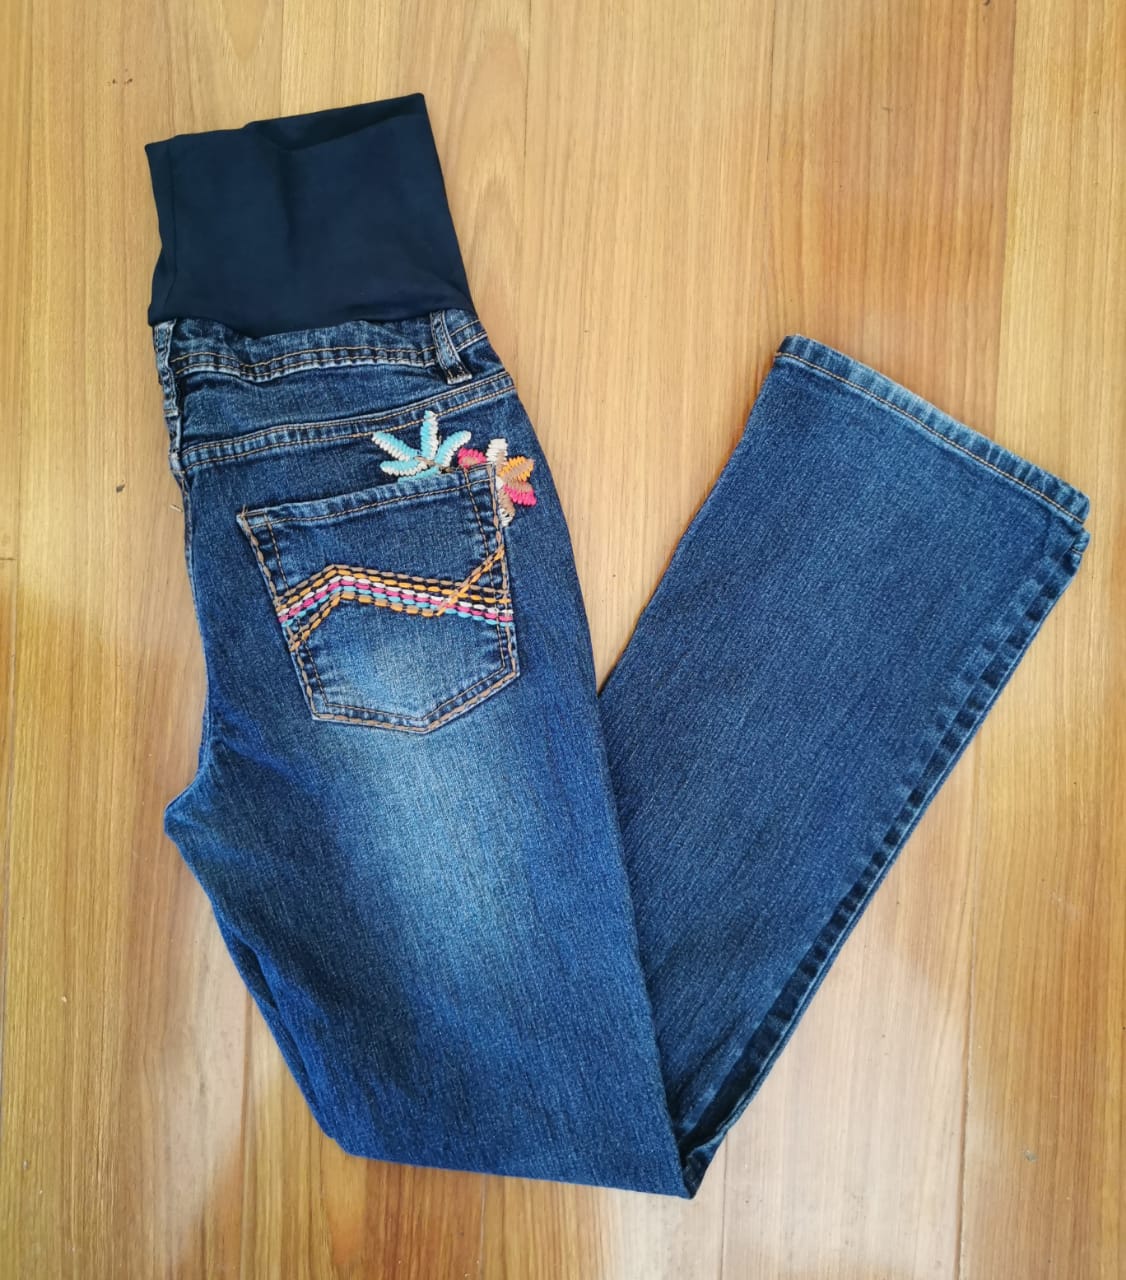 Jeans Pata Ancha Mamikids